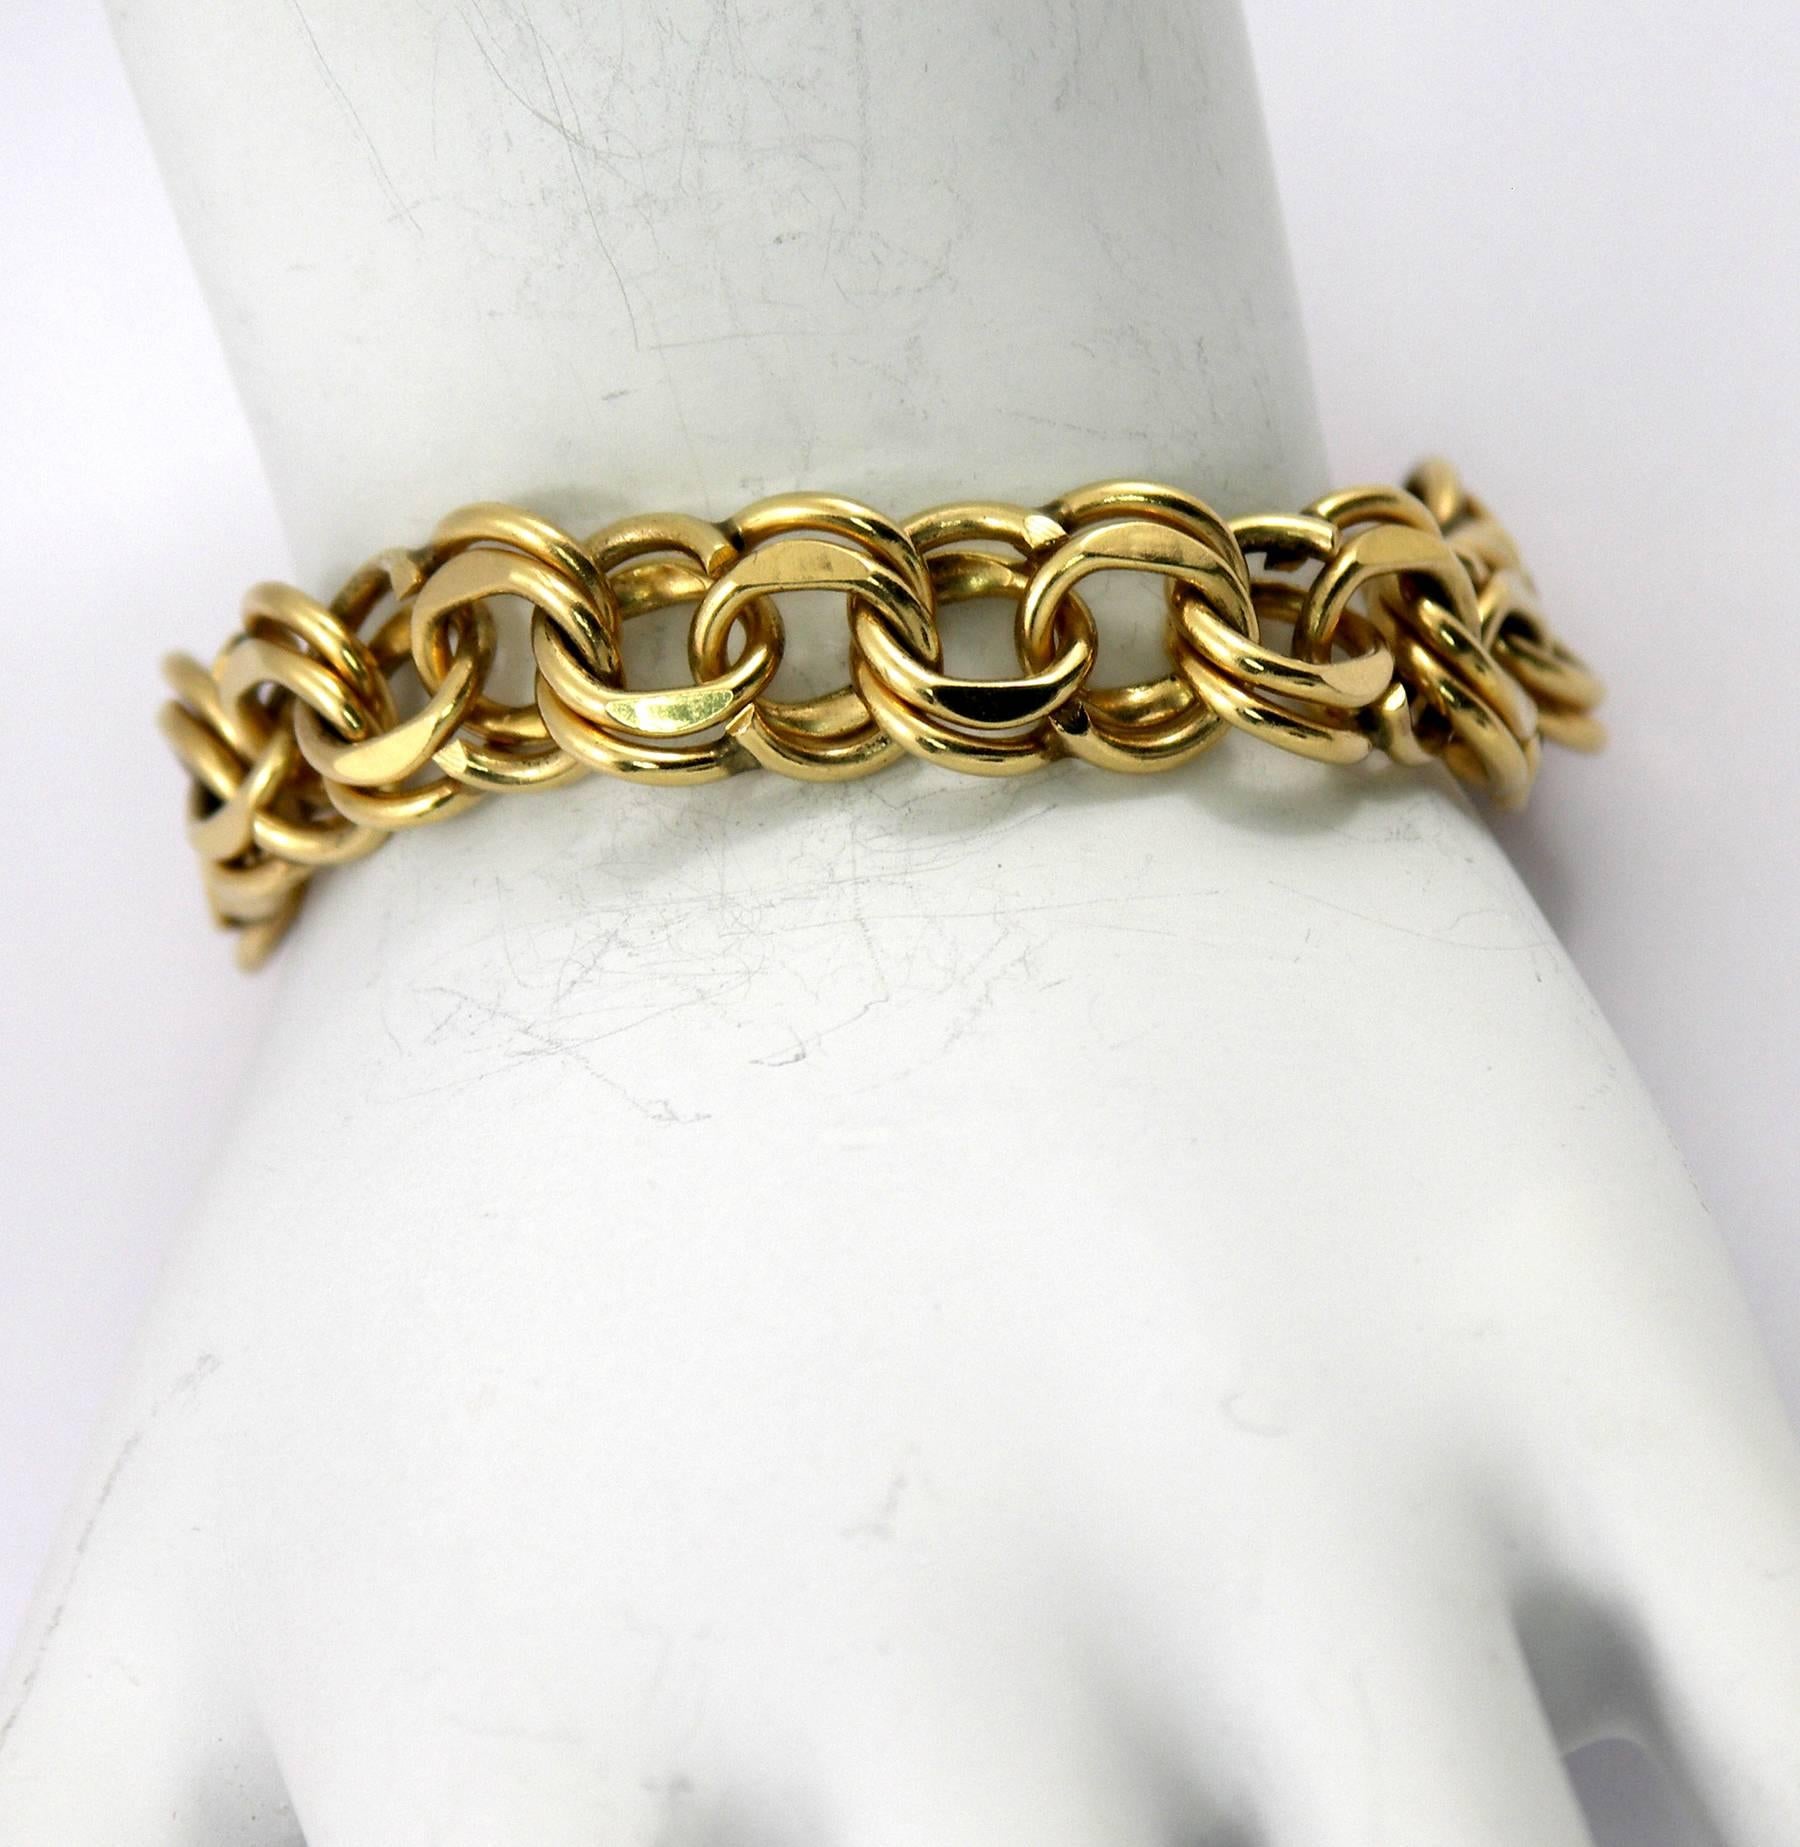 One 14K yellow gold double spiral link bracelet measuring 7/16 inches wide and 7 1/2 inches long. A beautiful bracelet often used for hanging charms.